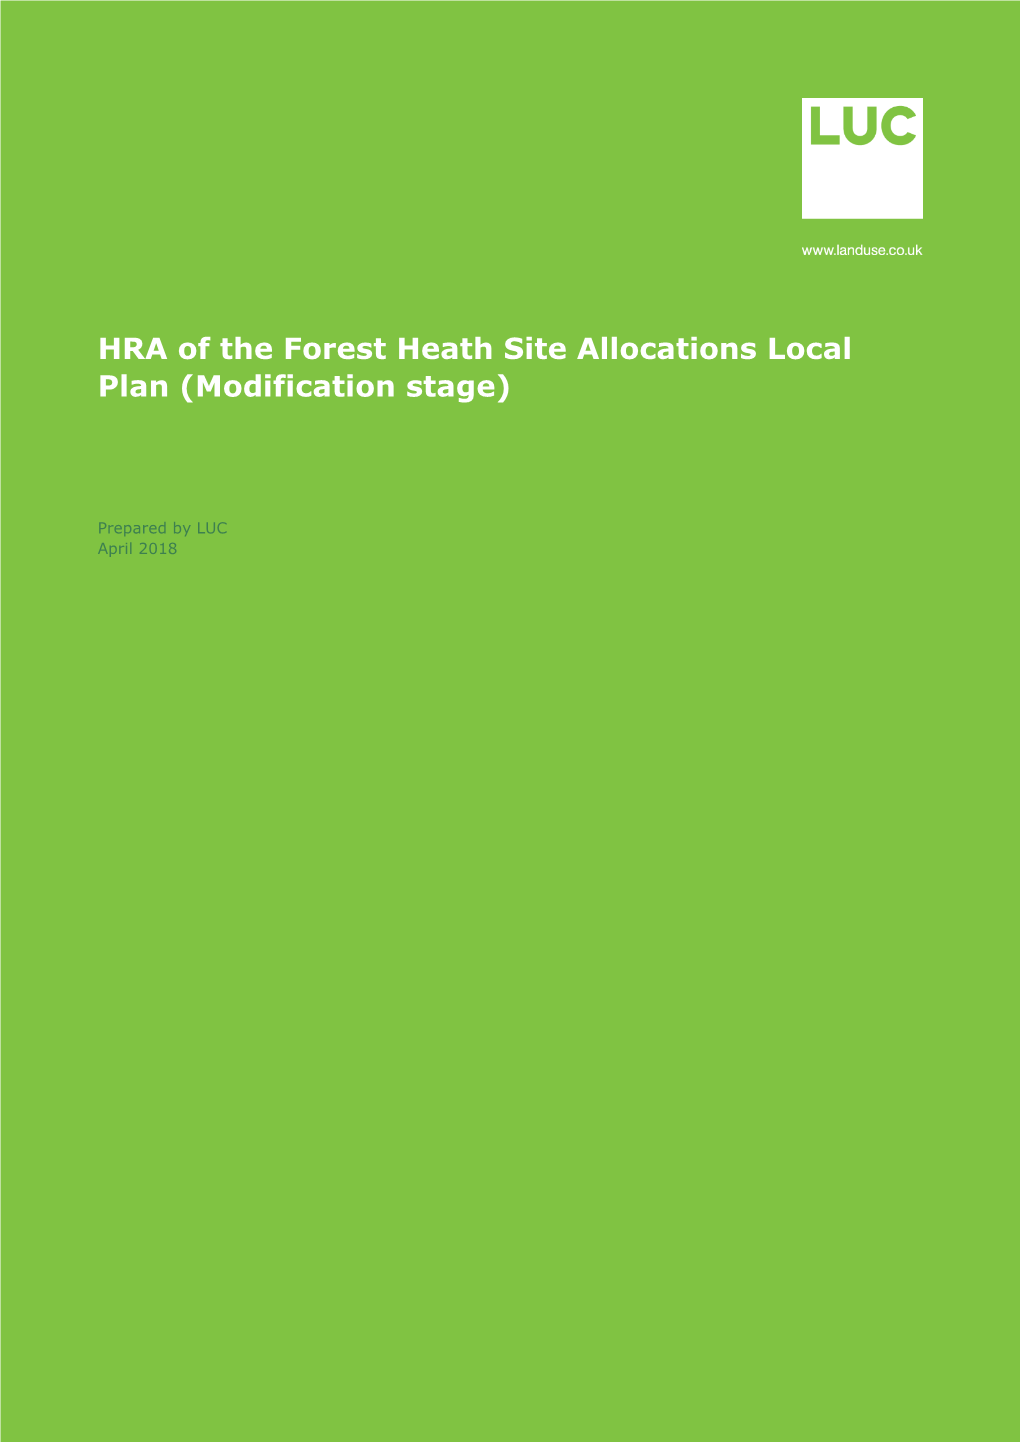 HRA of the Forest Heath Site Allocations Local Plan (Modification Stage)